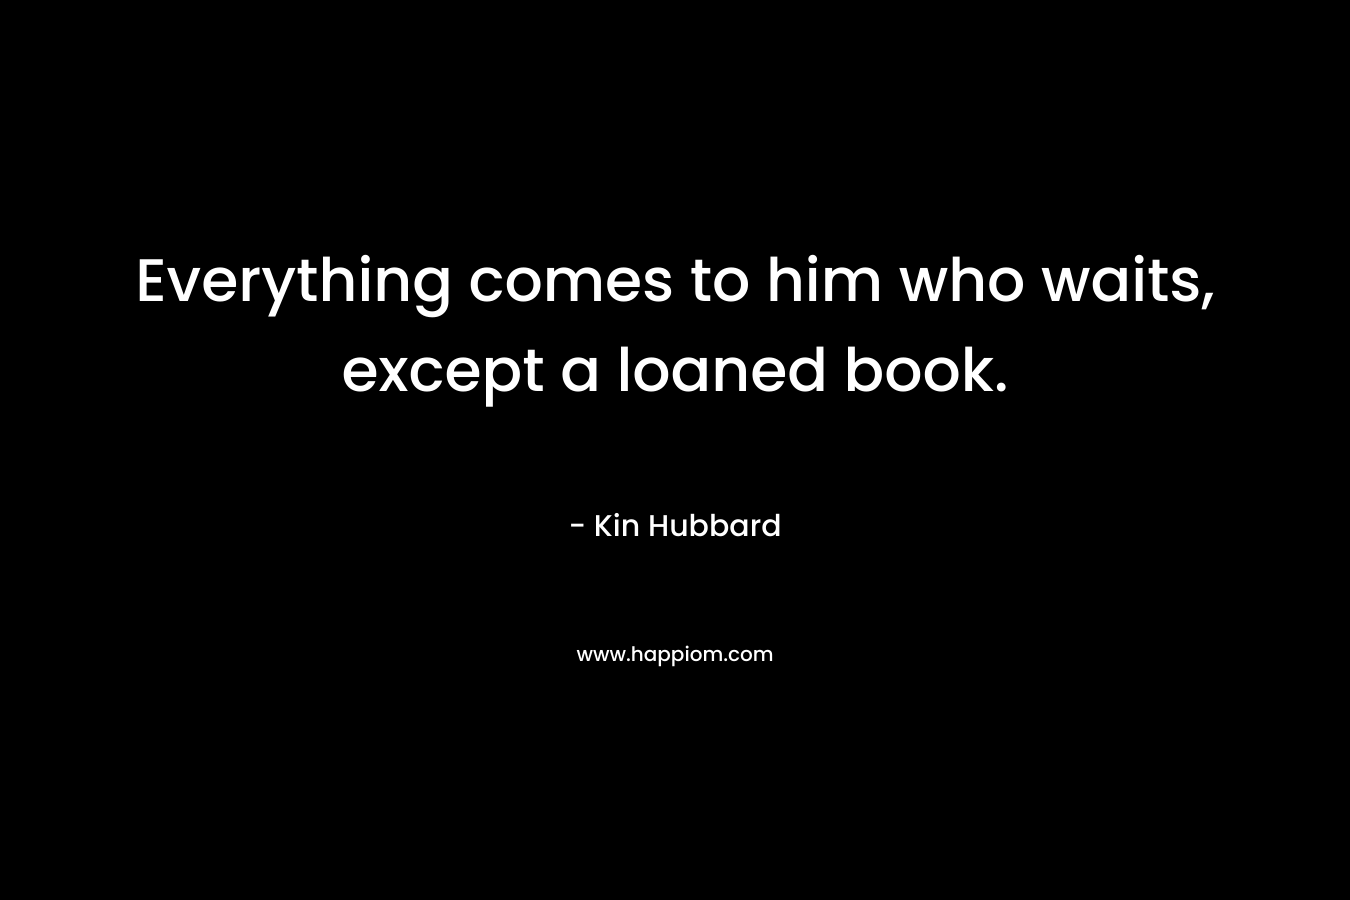 Everything comes to him who waits, except a loaned book. – Kin Hubbard